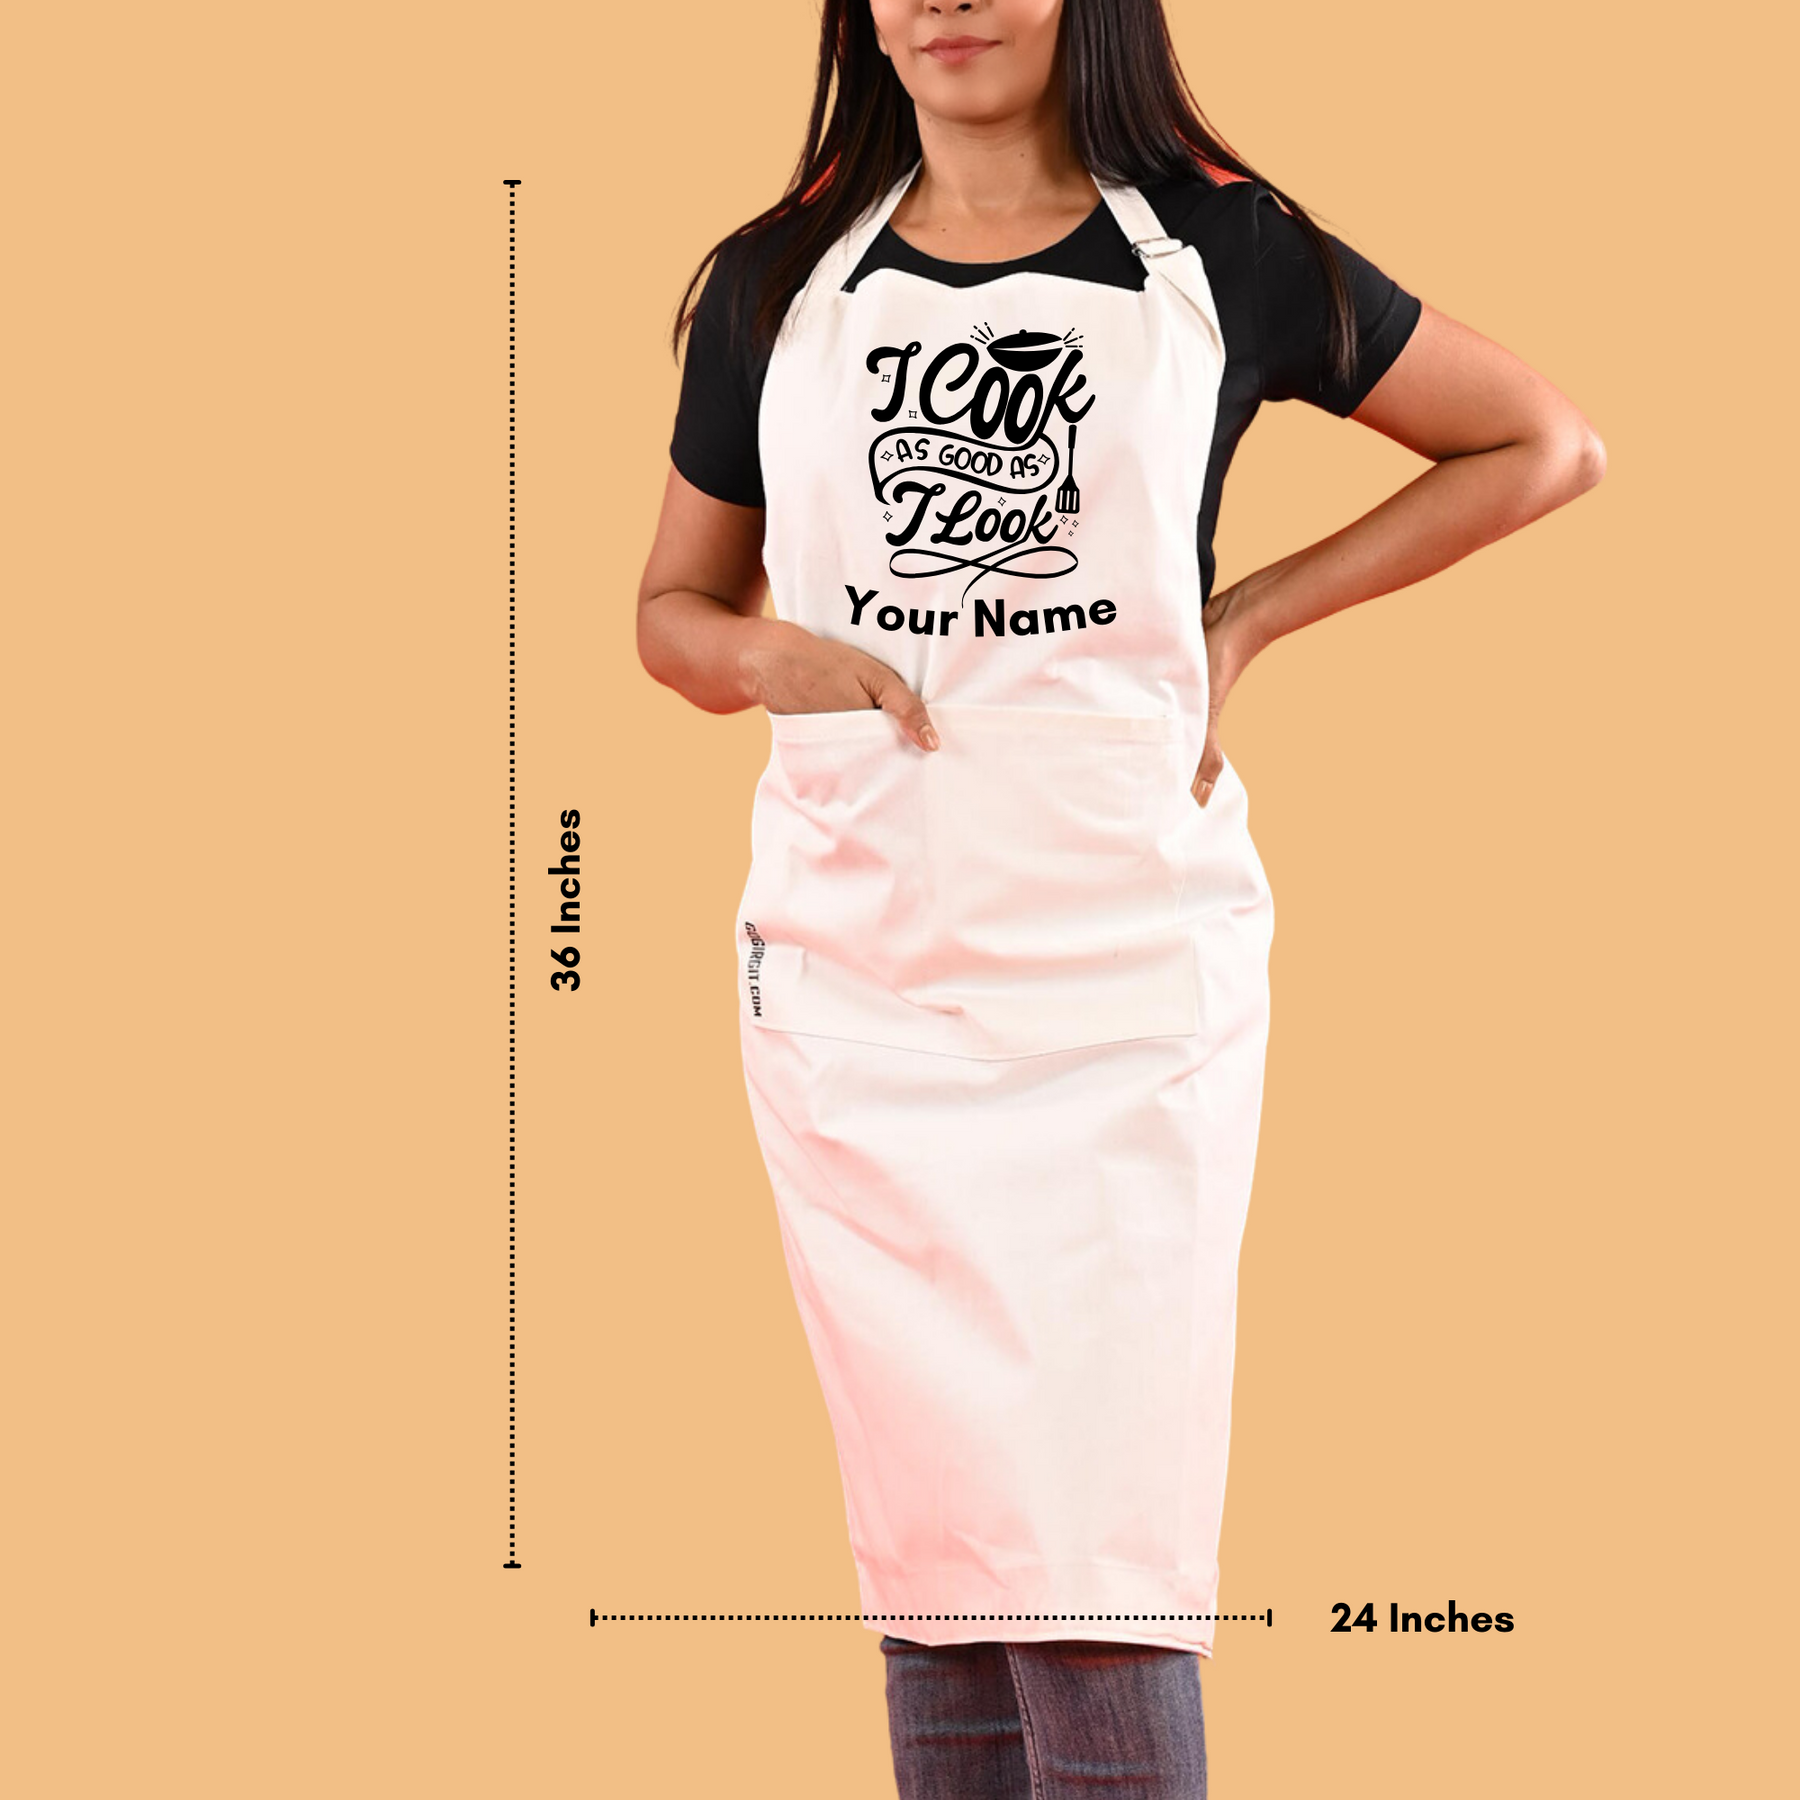 I-Cook-As-Good-As-I-Look-Personalised-Cotton-Apron-Size-Gogirgit